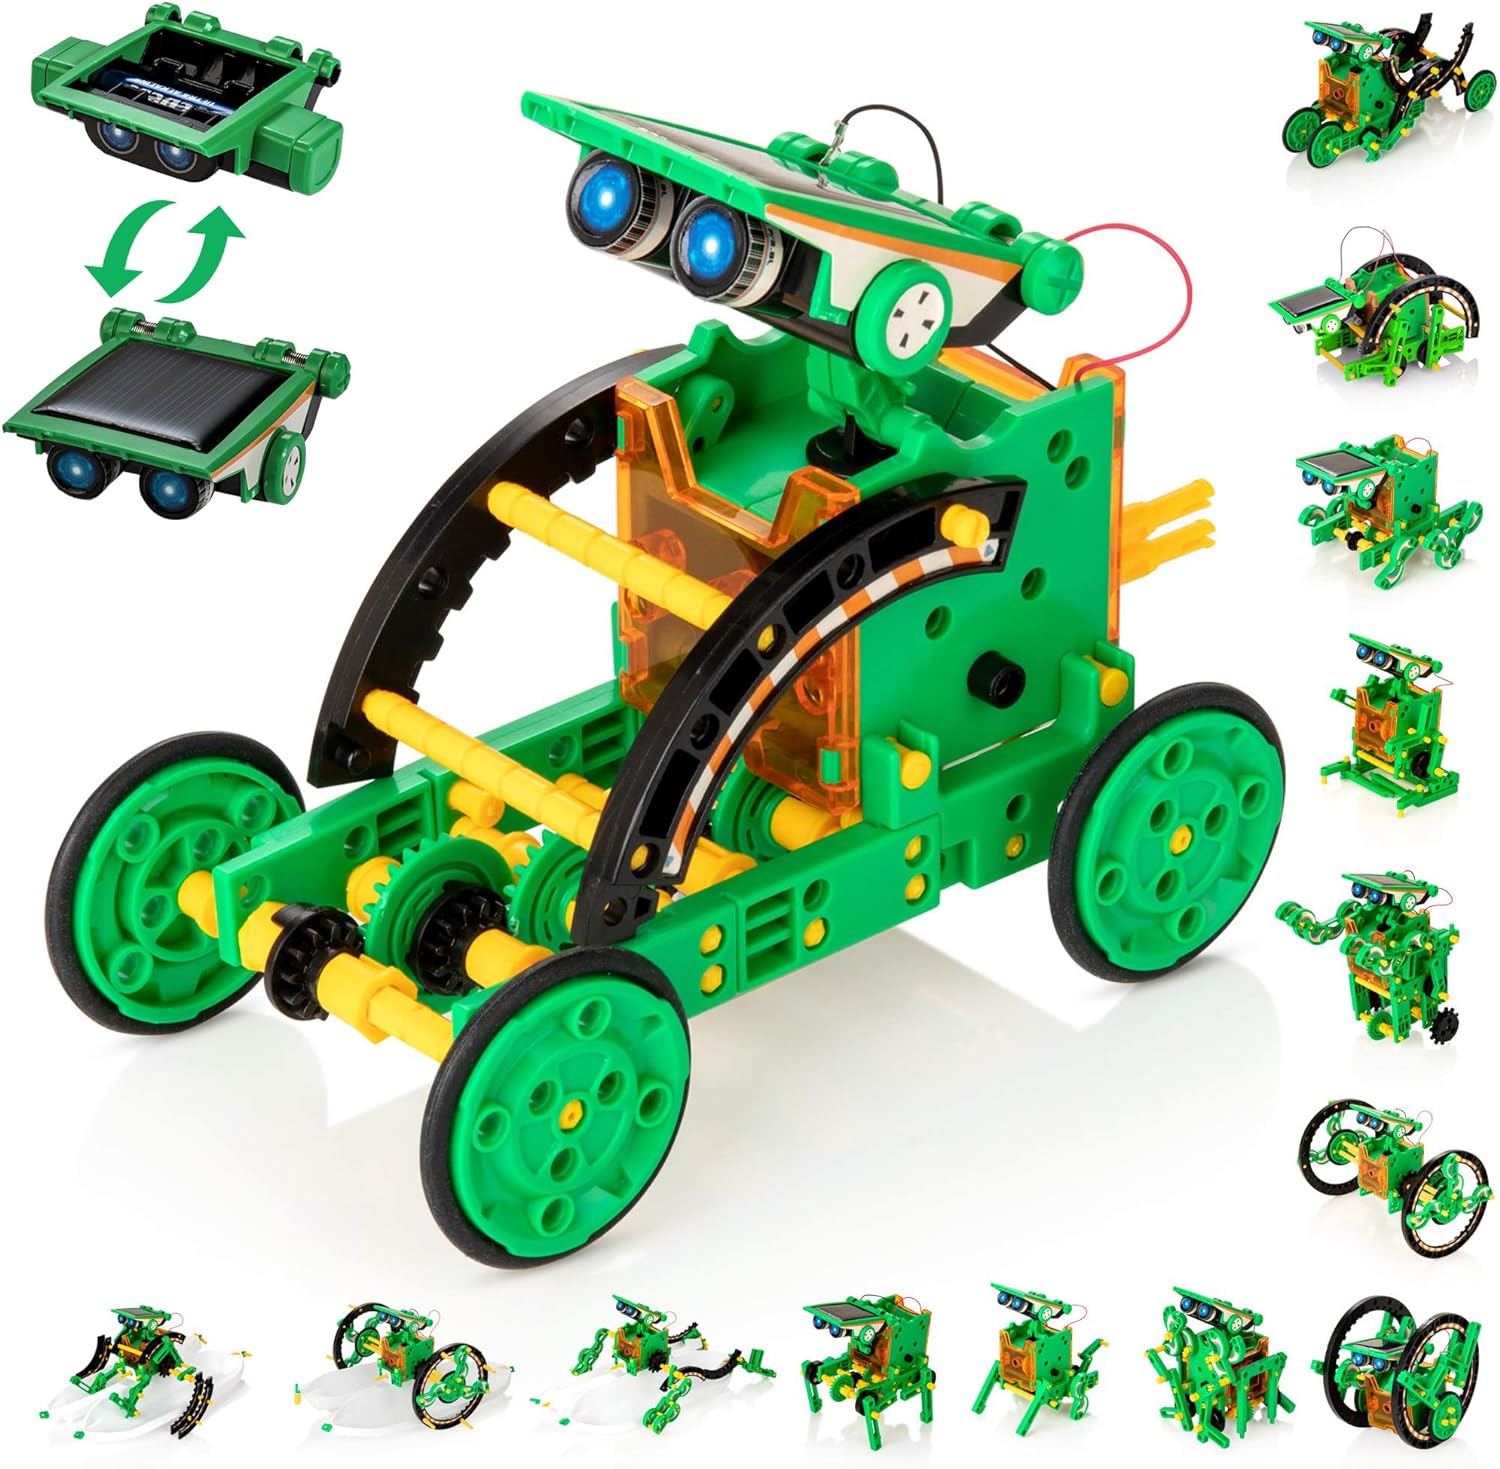 Solar Robot Kit for Kids, 14-in-1 Educational STEM Science Toy, Solar Power Building Kit DIY Assembly Battery Operated Robotic Set for Kids, Teens and Science Lovers(Battery Include) - Green